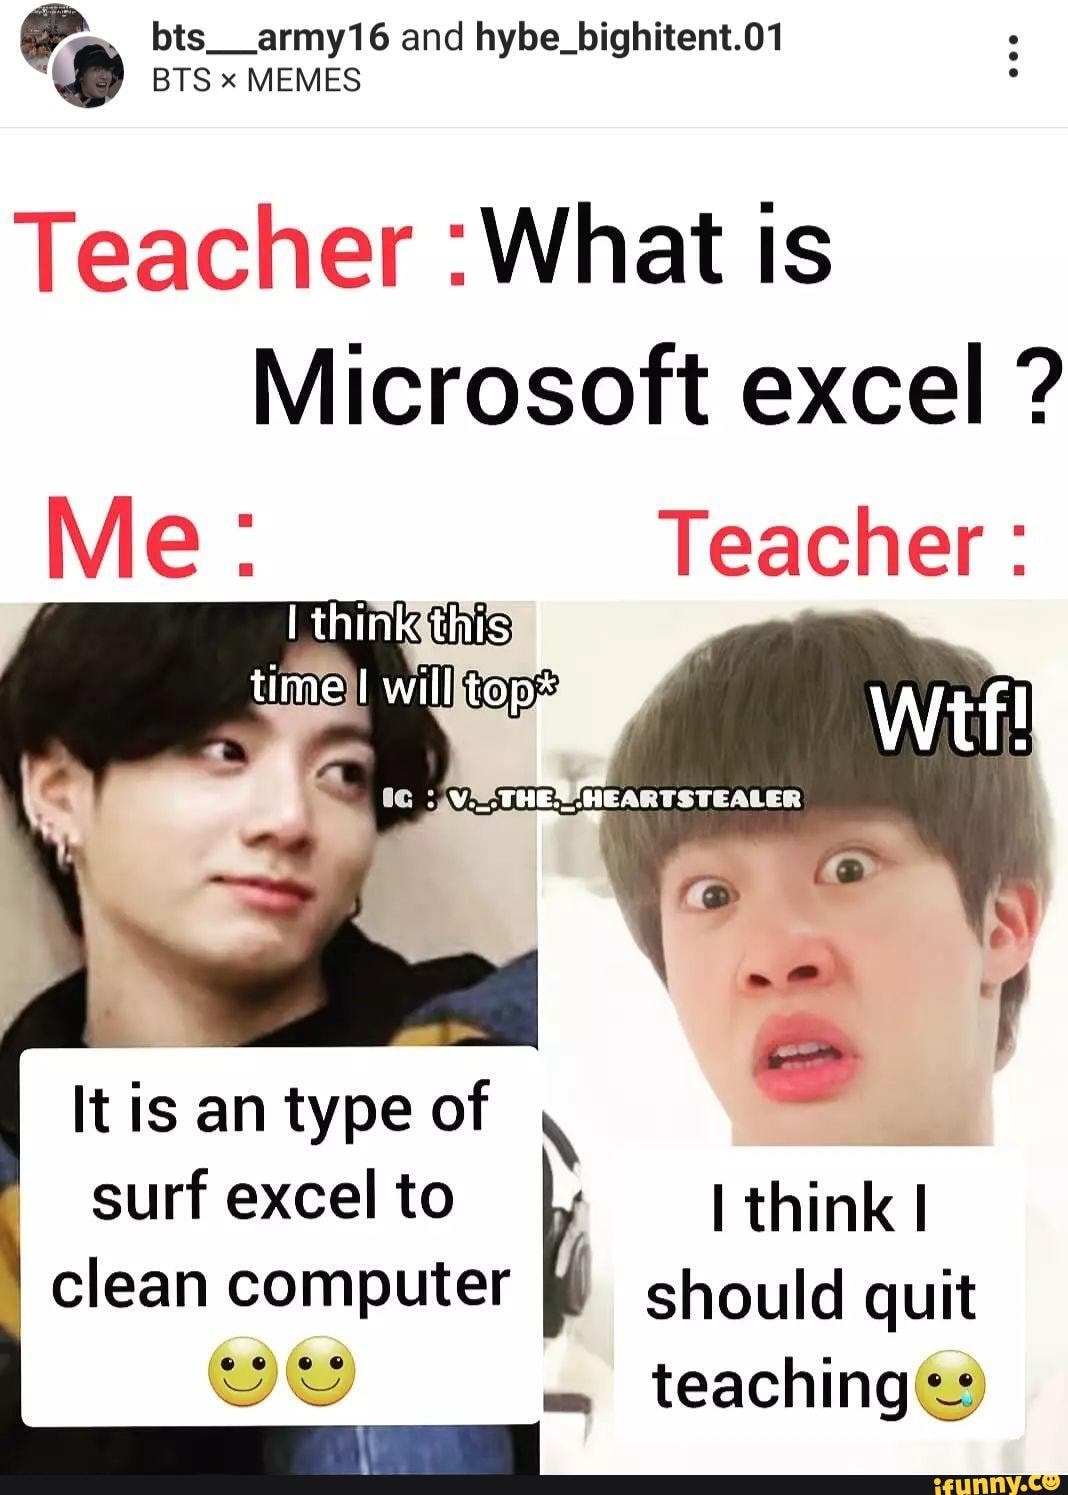 Memes Box - e. bts. and  BIS x ME Teacher :What Is  Microsoft excel ? Me: Teacher : inkgthis} time! It is an type of surf excel  to think I clean